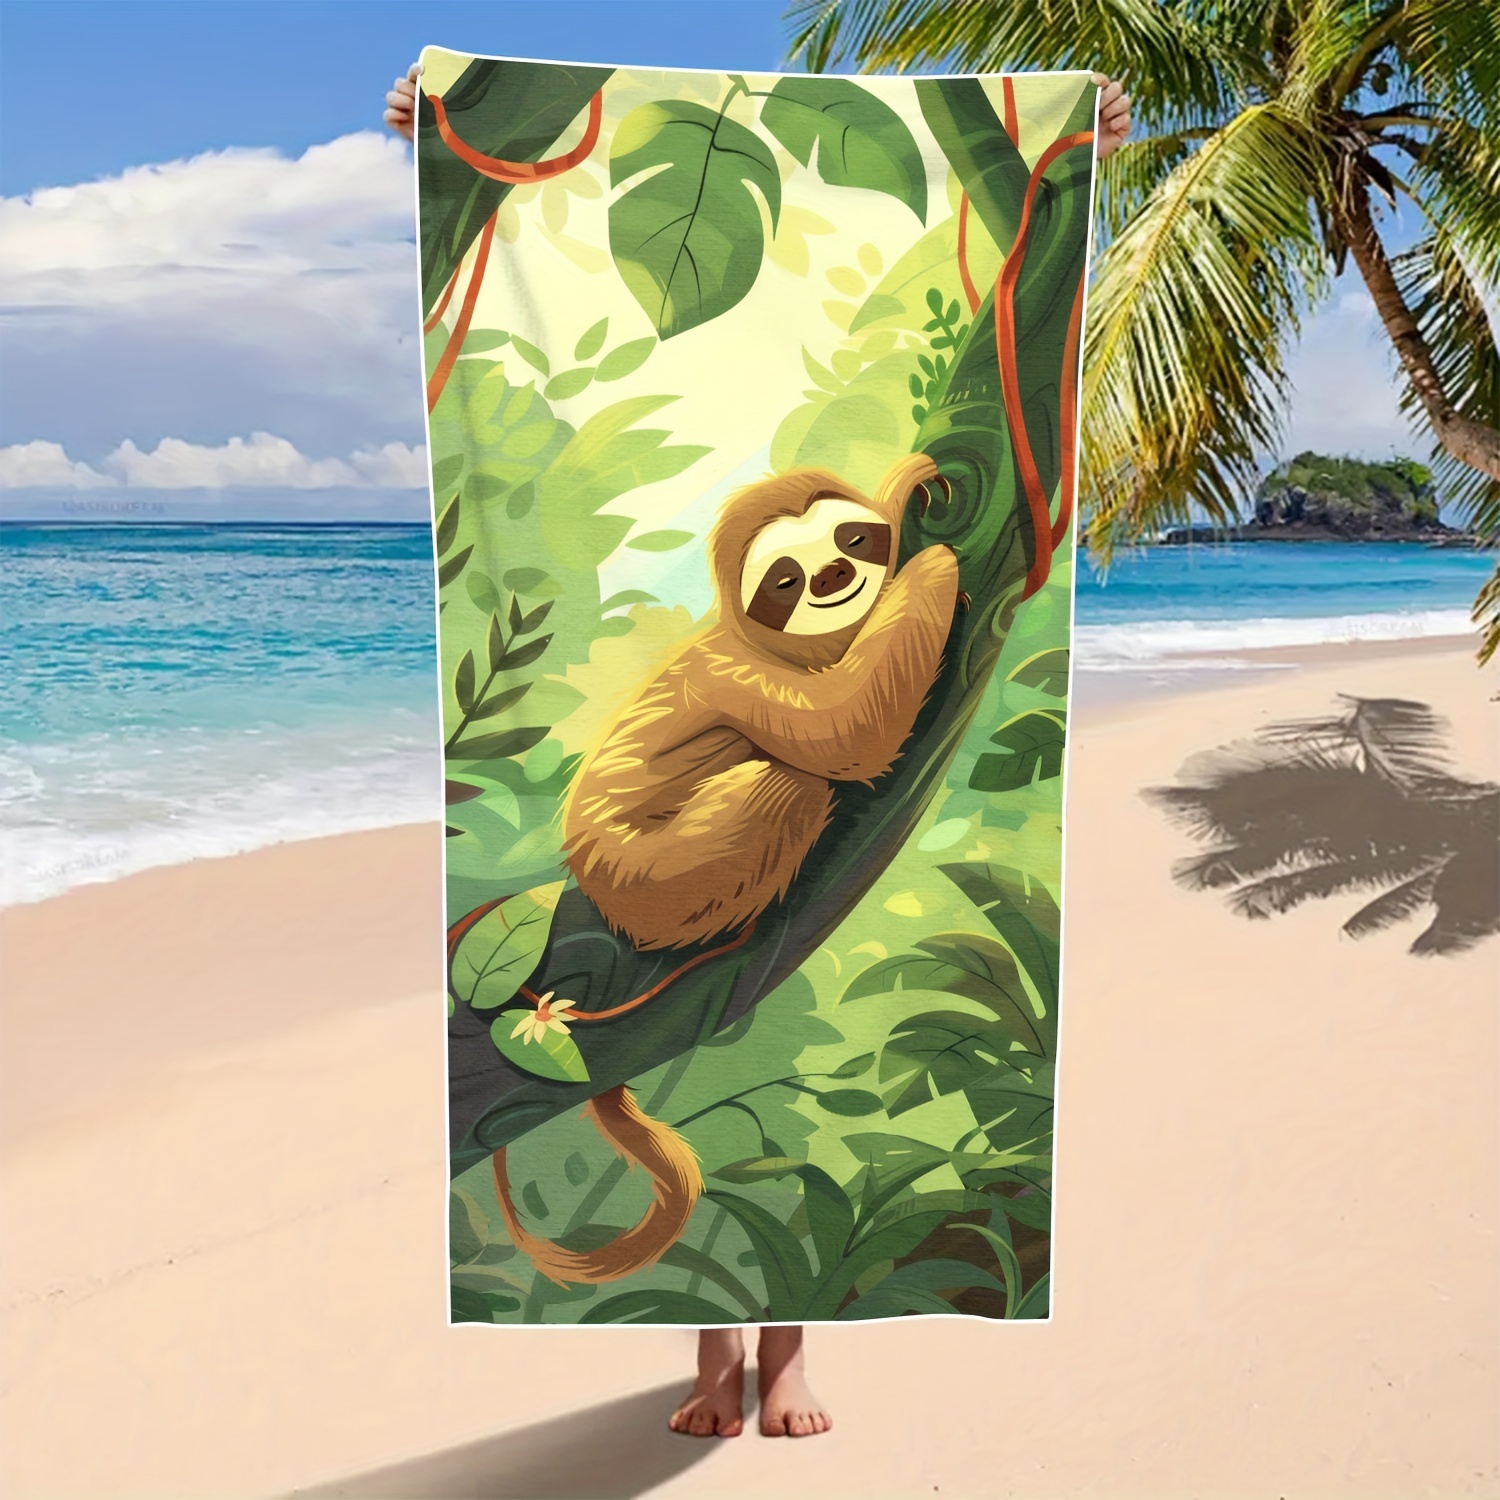 

Sloth Cartoon Microfiber Beach Towel - Quick Dry, Lightweight, Soft, Absorbent, Sun Protective - Ideal For Travel, Pool, Vacation - Machine Washable, Durable - Perfect Holiday Gift